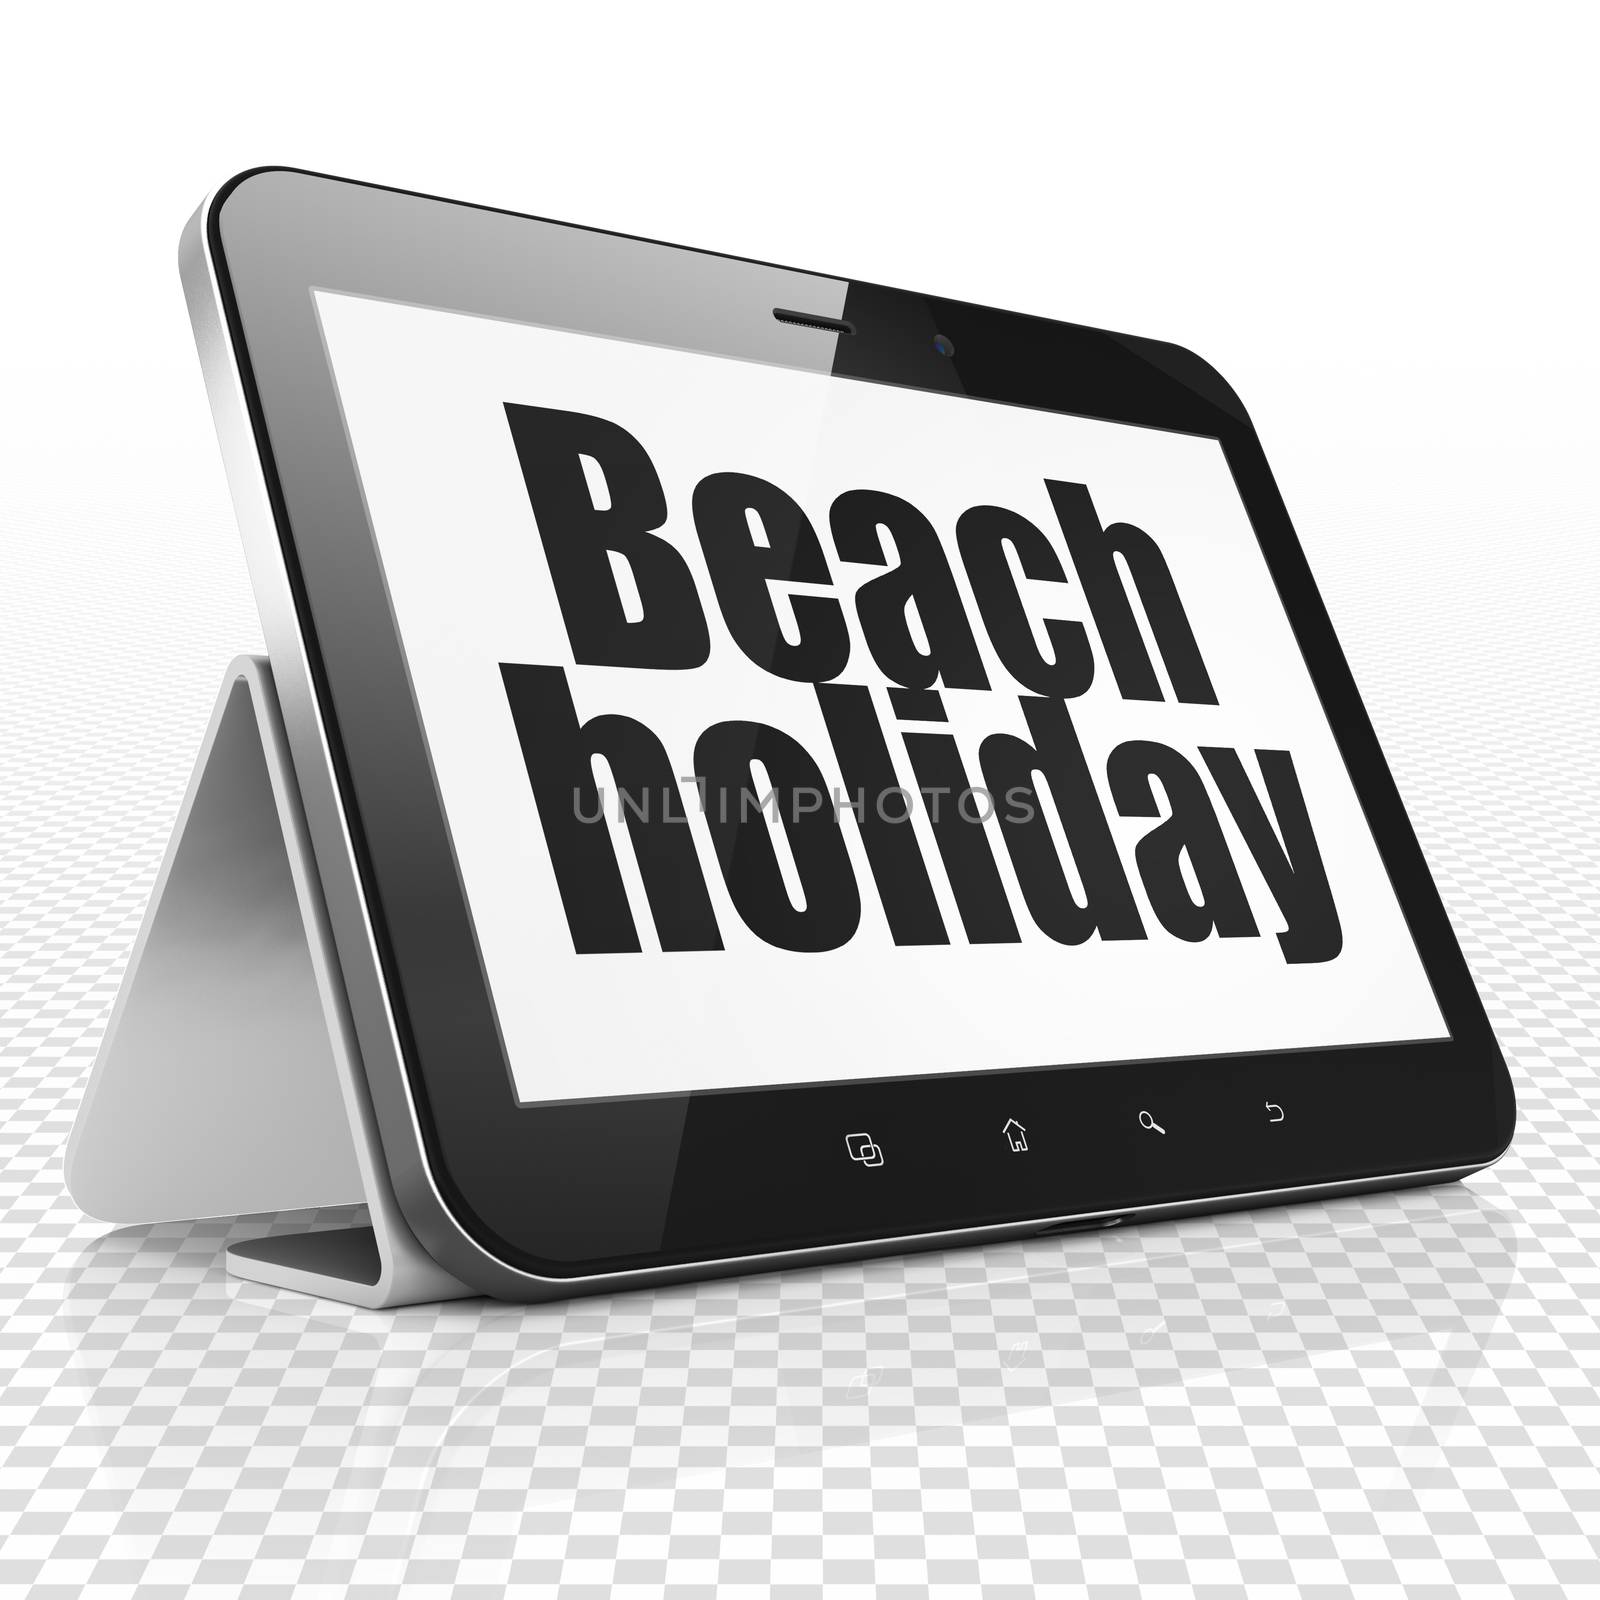 Travel concept: Tablet Computer with black text Beach Holiday on display